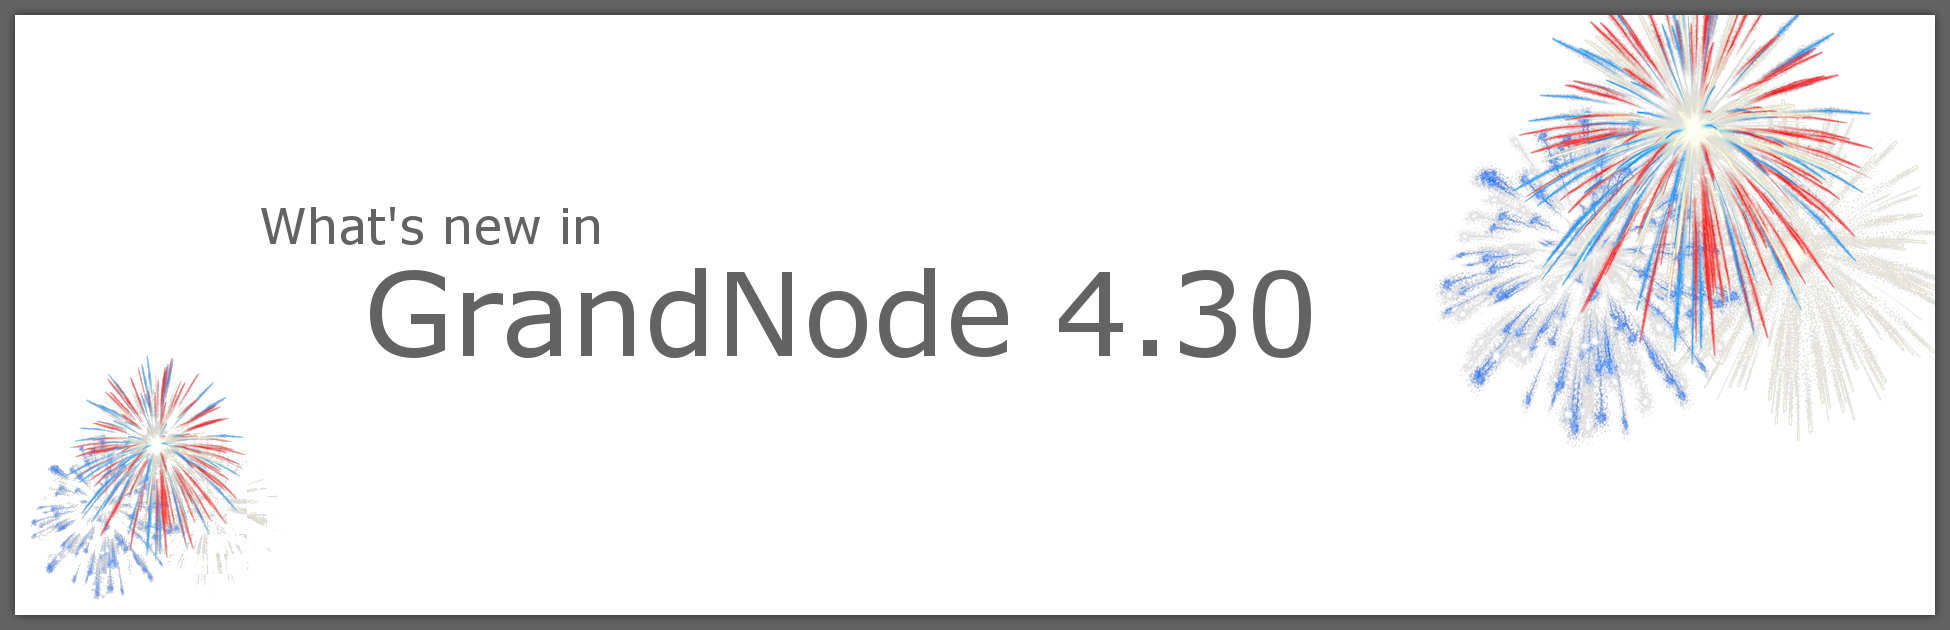 Picture for blog post What's new in GrandNode 4.30?